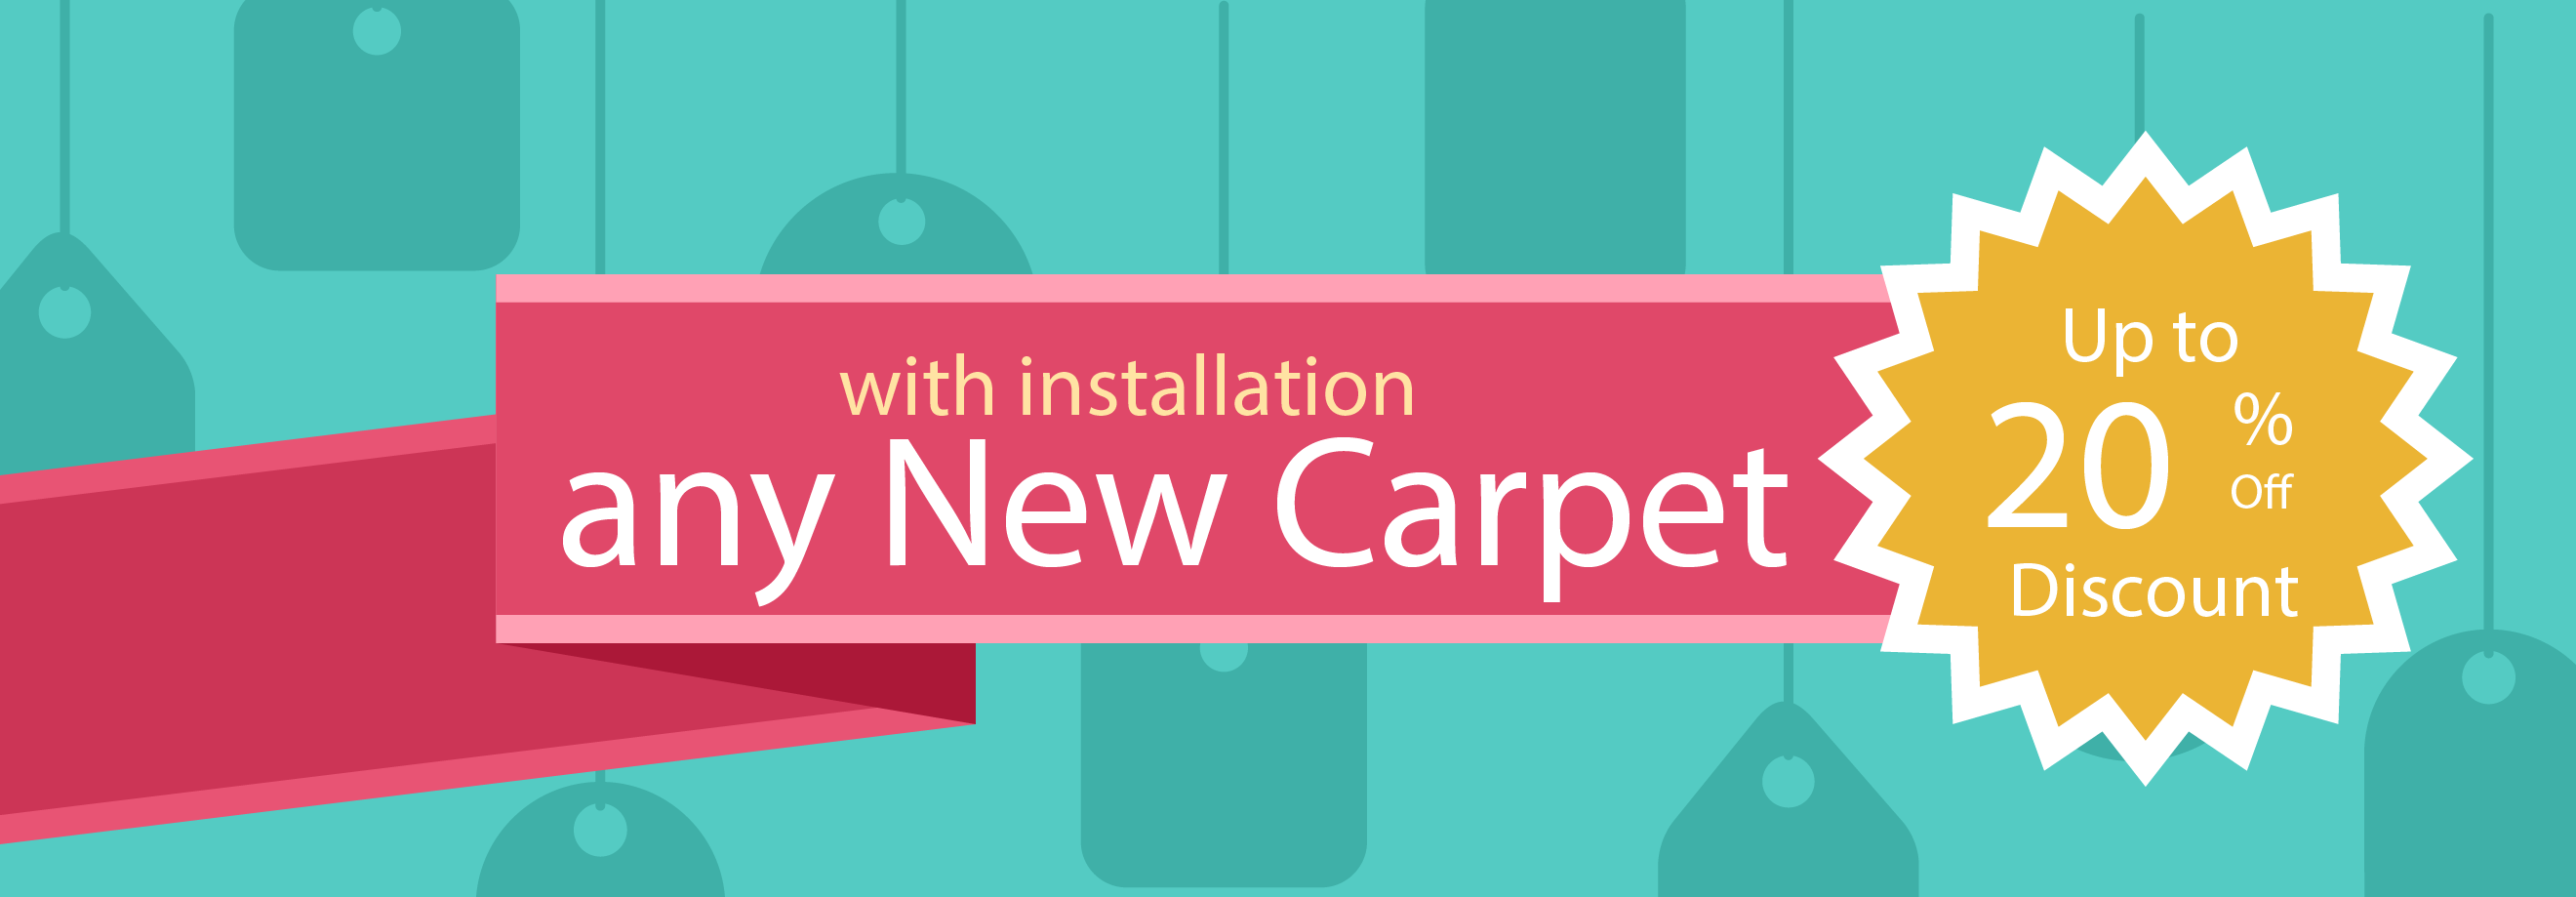 With installation any new carpet